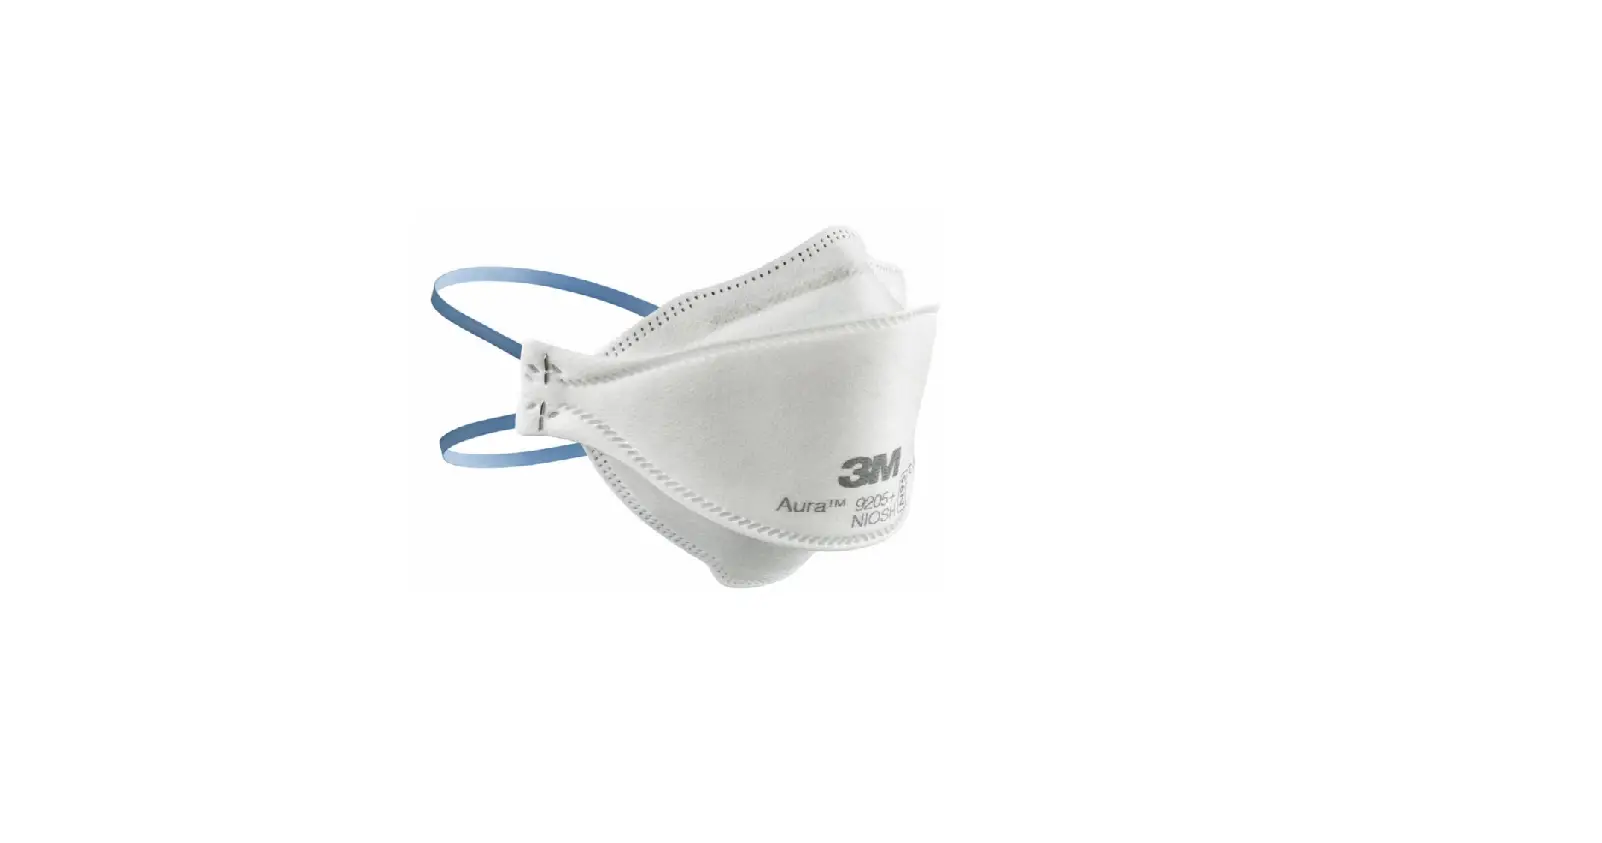 Particulate Respirator 8214, N95 Vapor packed